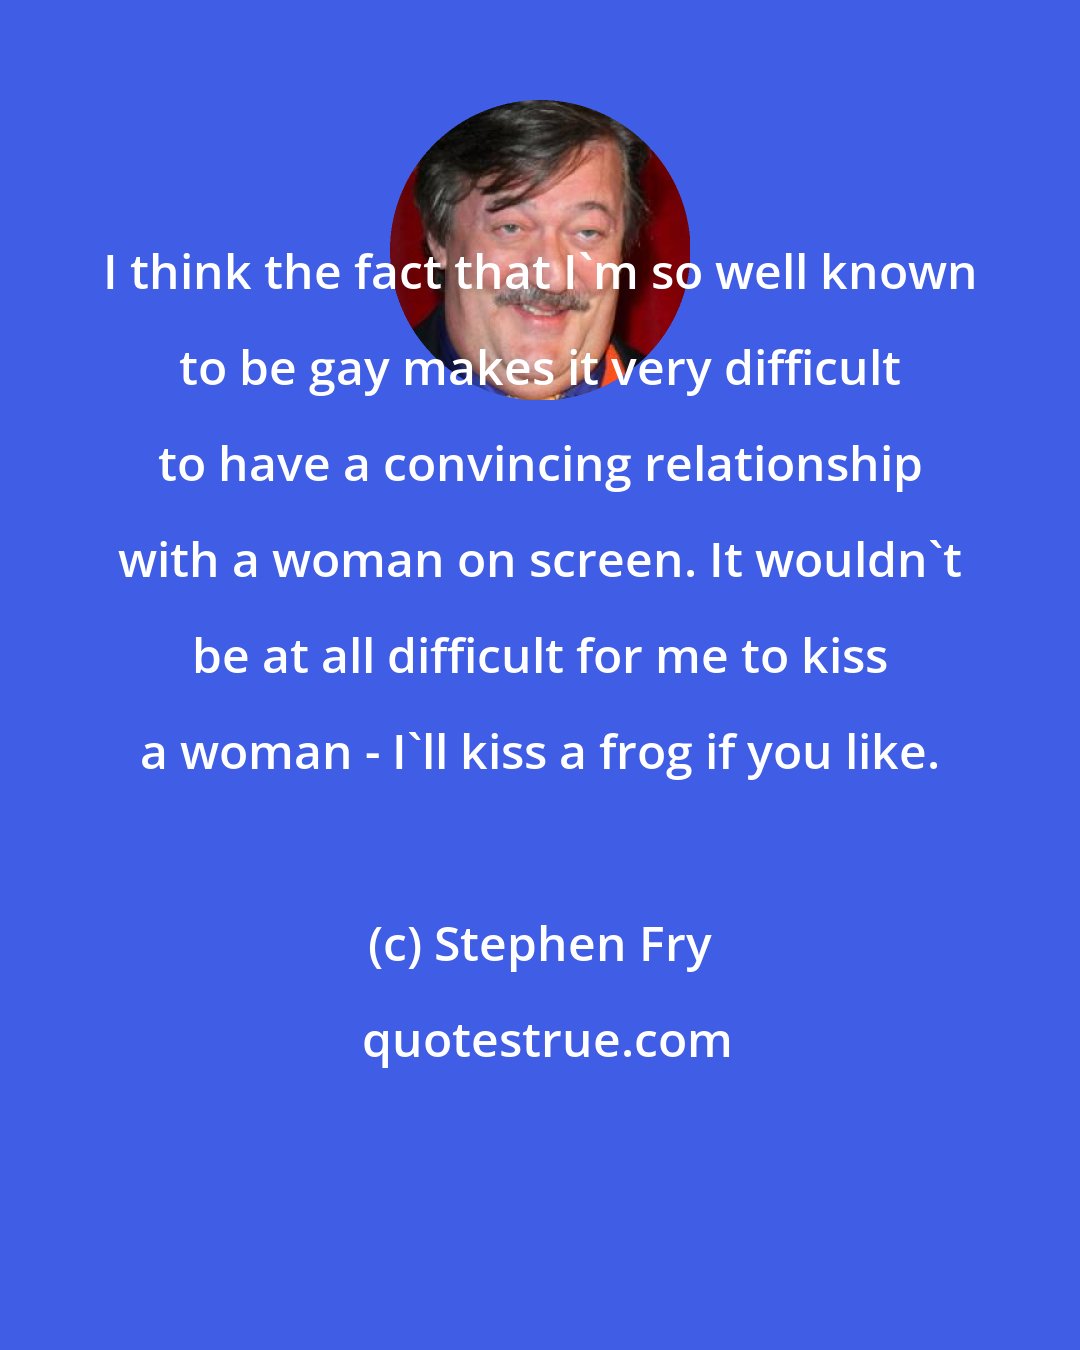 Stephen Fry: I think the fact that I'm so well known to be gay makes it very difficult to have a convincing relationship with a woman on screen. It wouldn't be at all difficult for me to kiss a woman - I'll kiss a frog if you like.